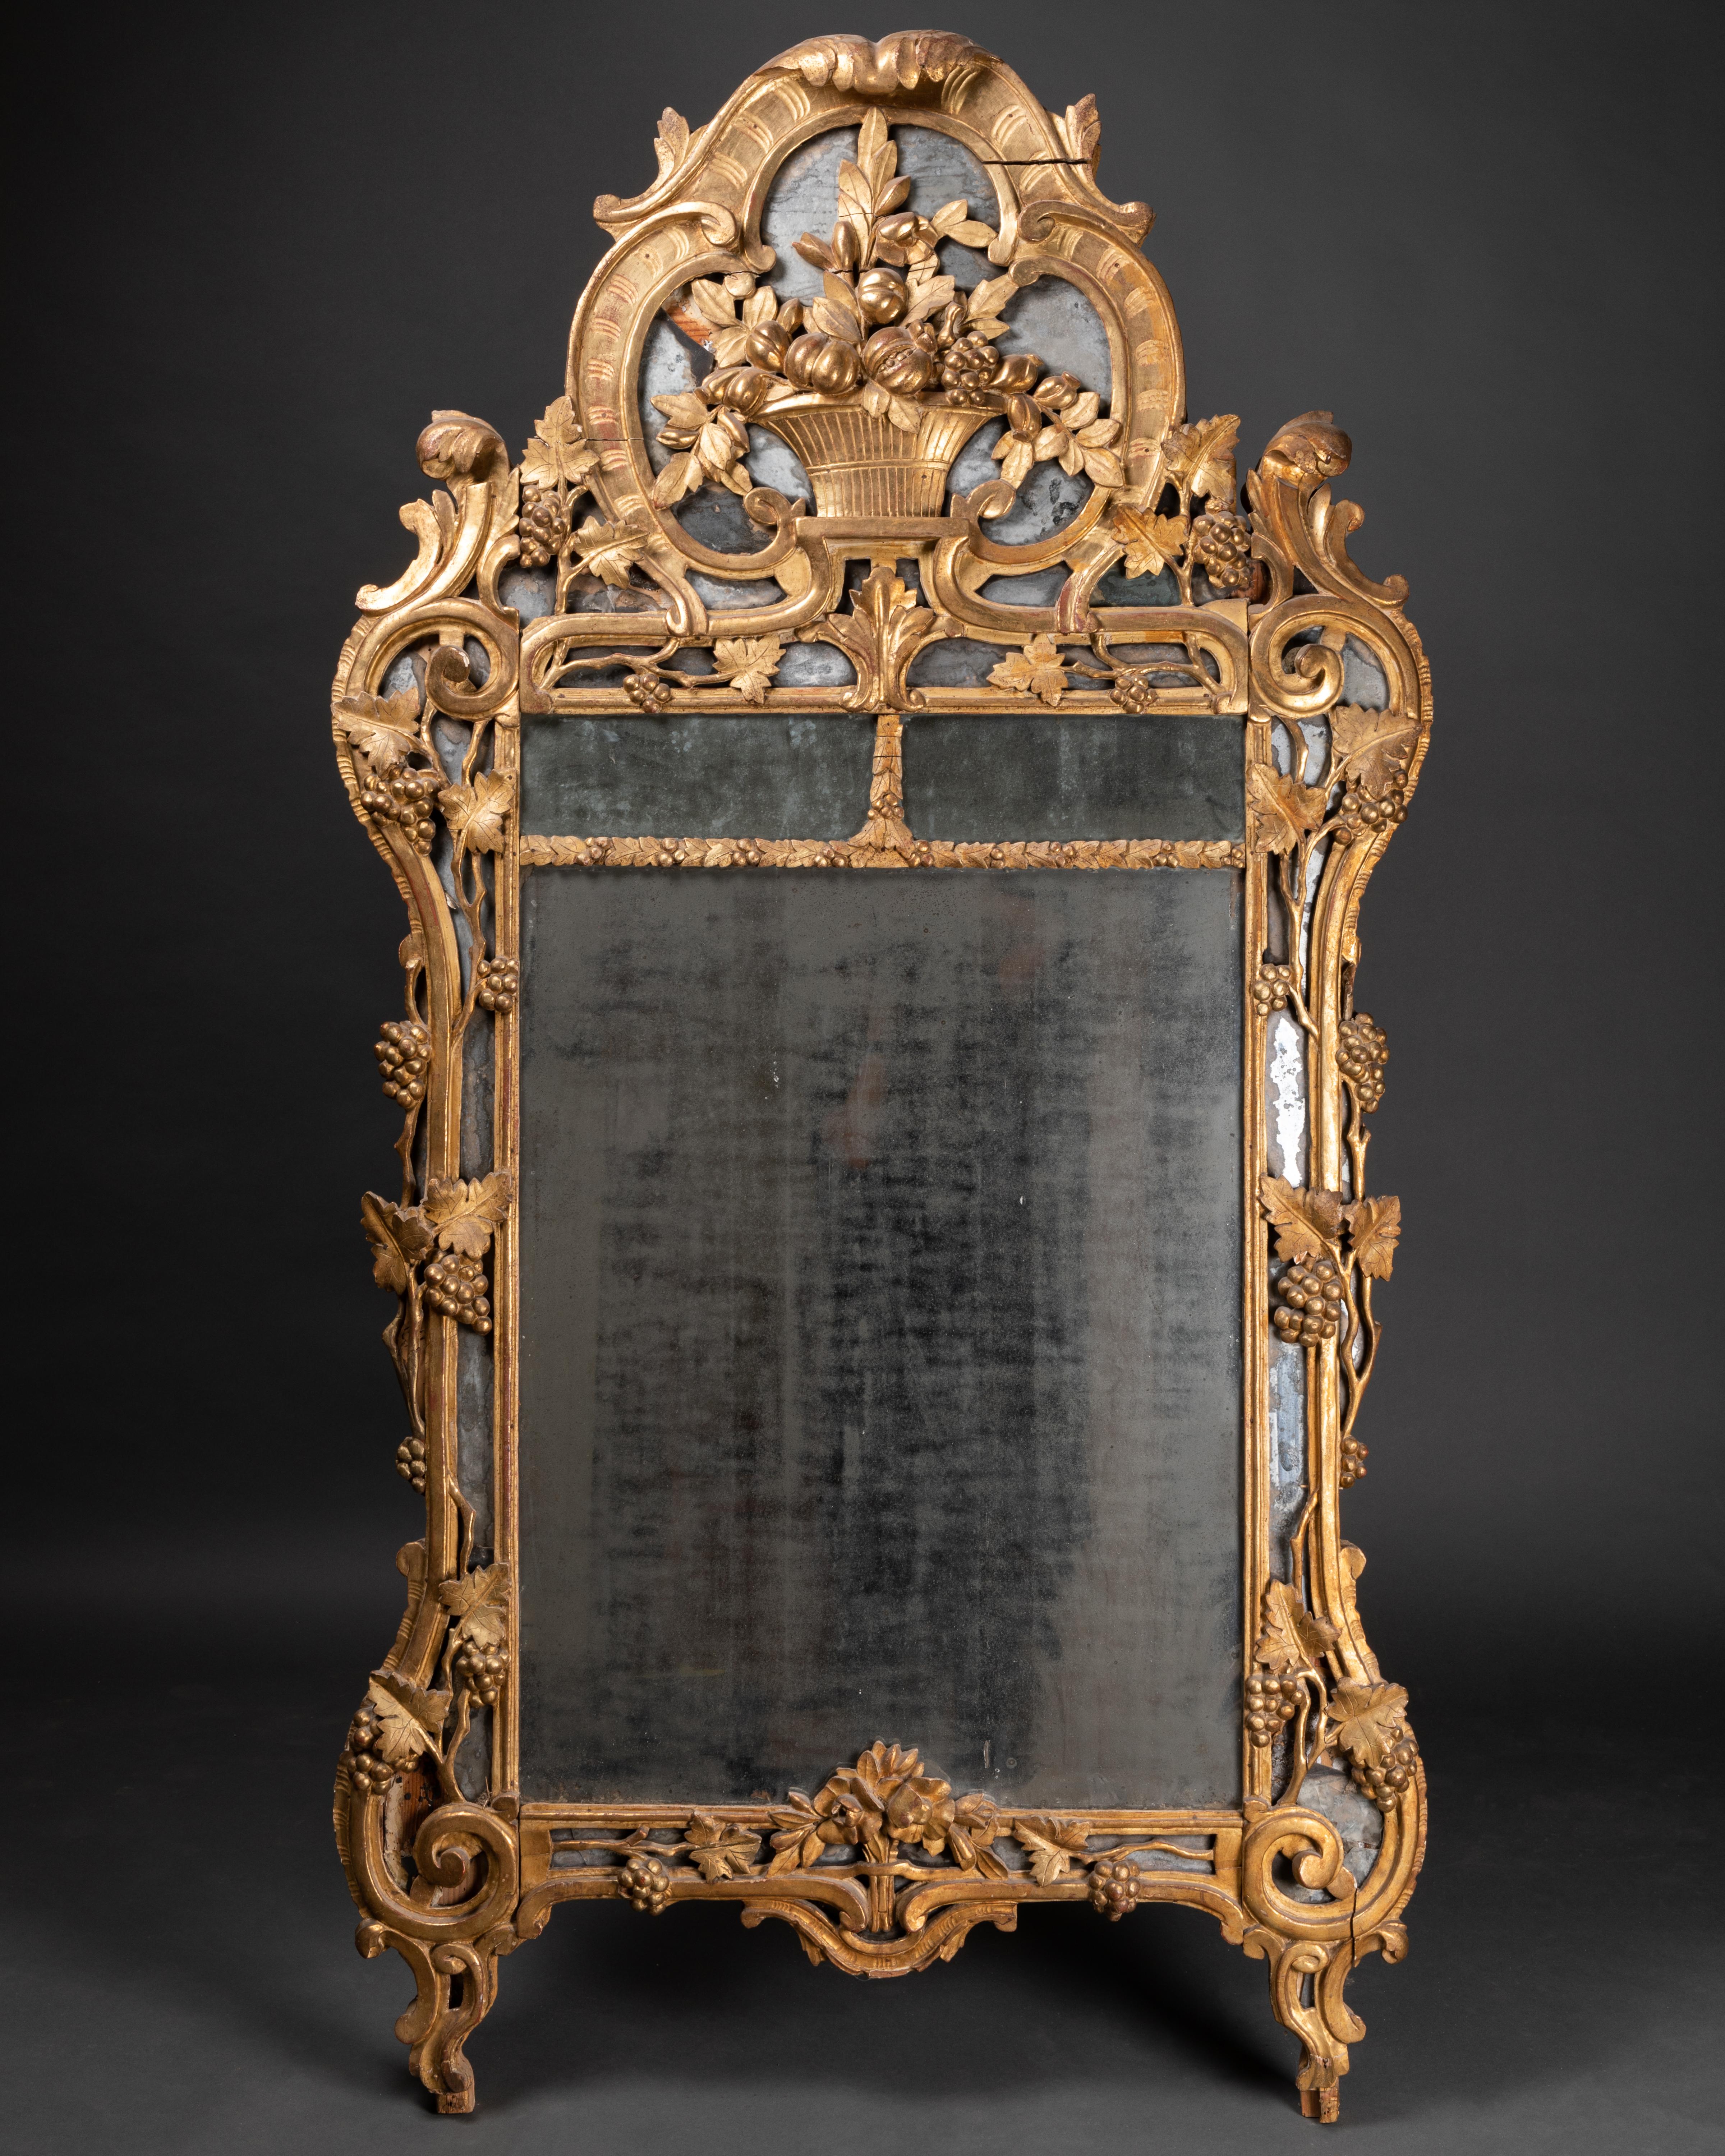 French provincial work from the 18th century. Mercury mirror in carved, gilded wooden frame. Centered on a basket filled with fruit in a vine environment.